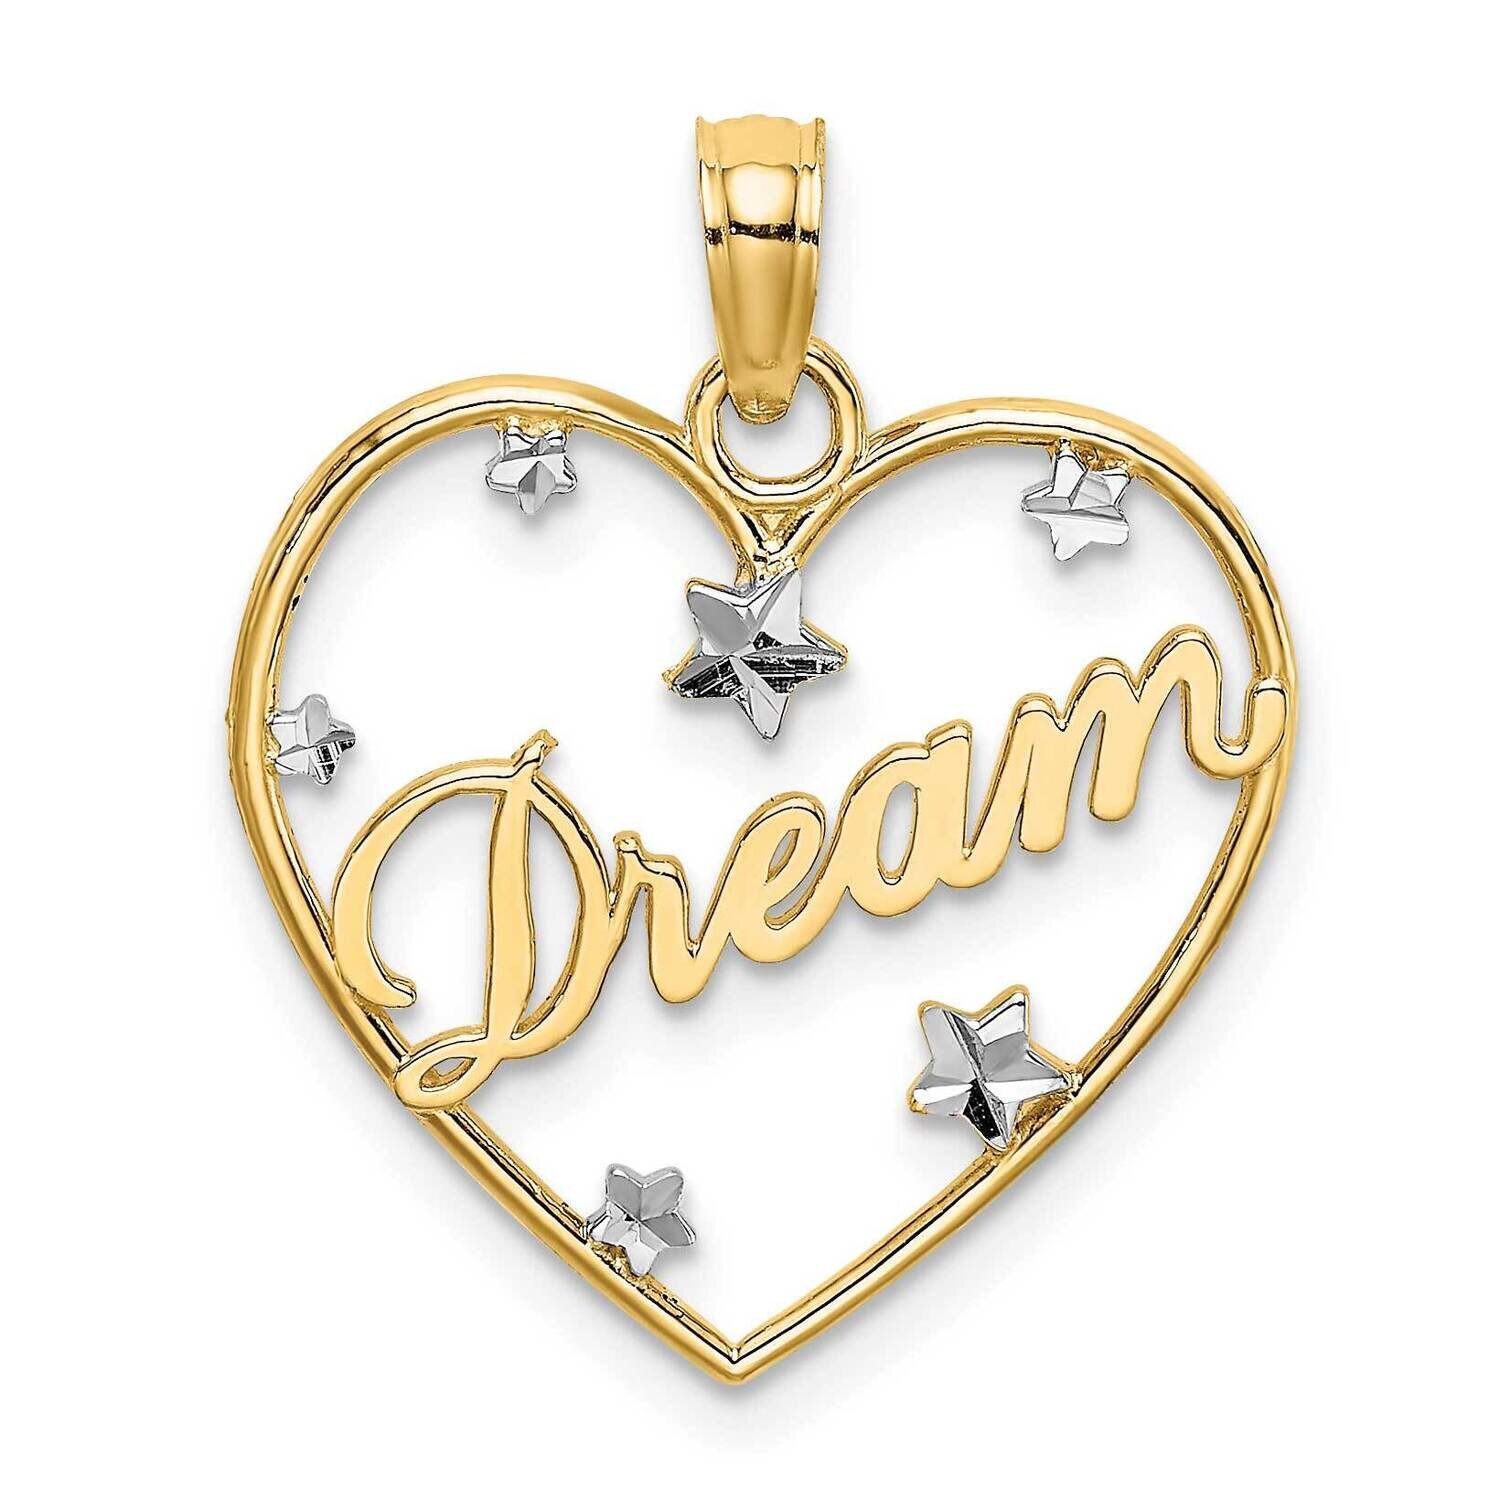 Dream In Heart Frame with Rh Star Accents Charm 14k Gold Diamond-cut K9396